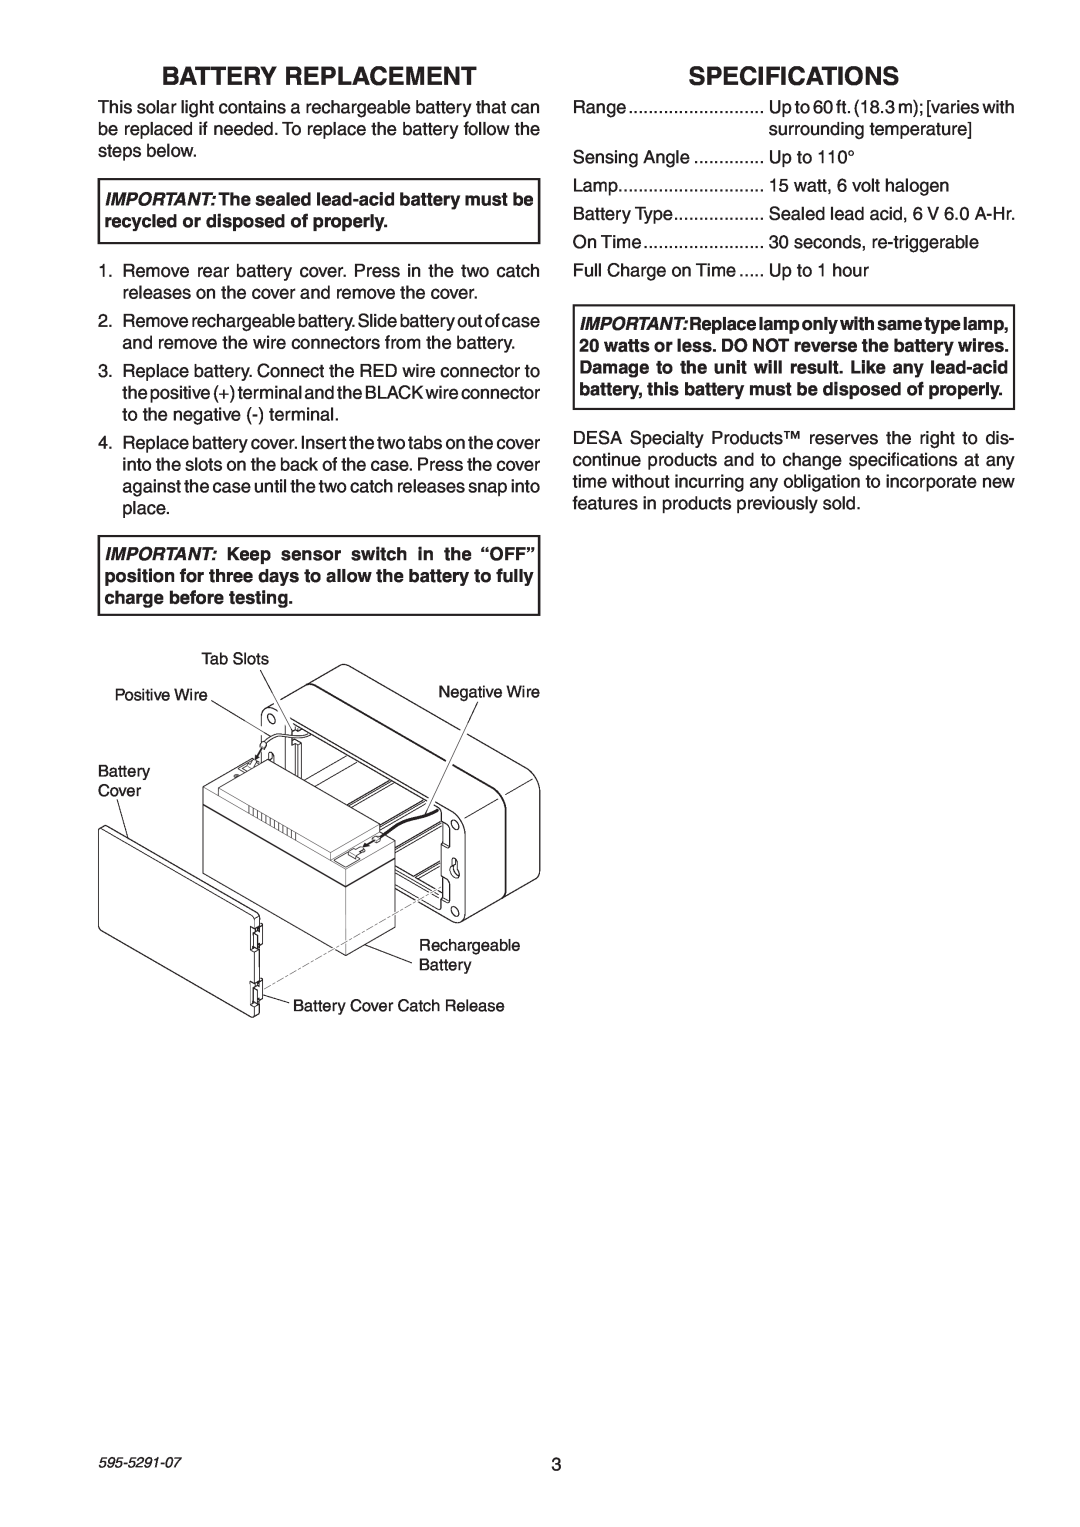 Heath Zenith SL-7001 manual Battery Replacement, Specifications 